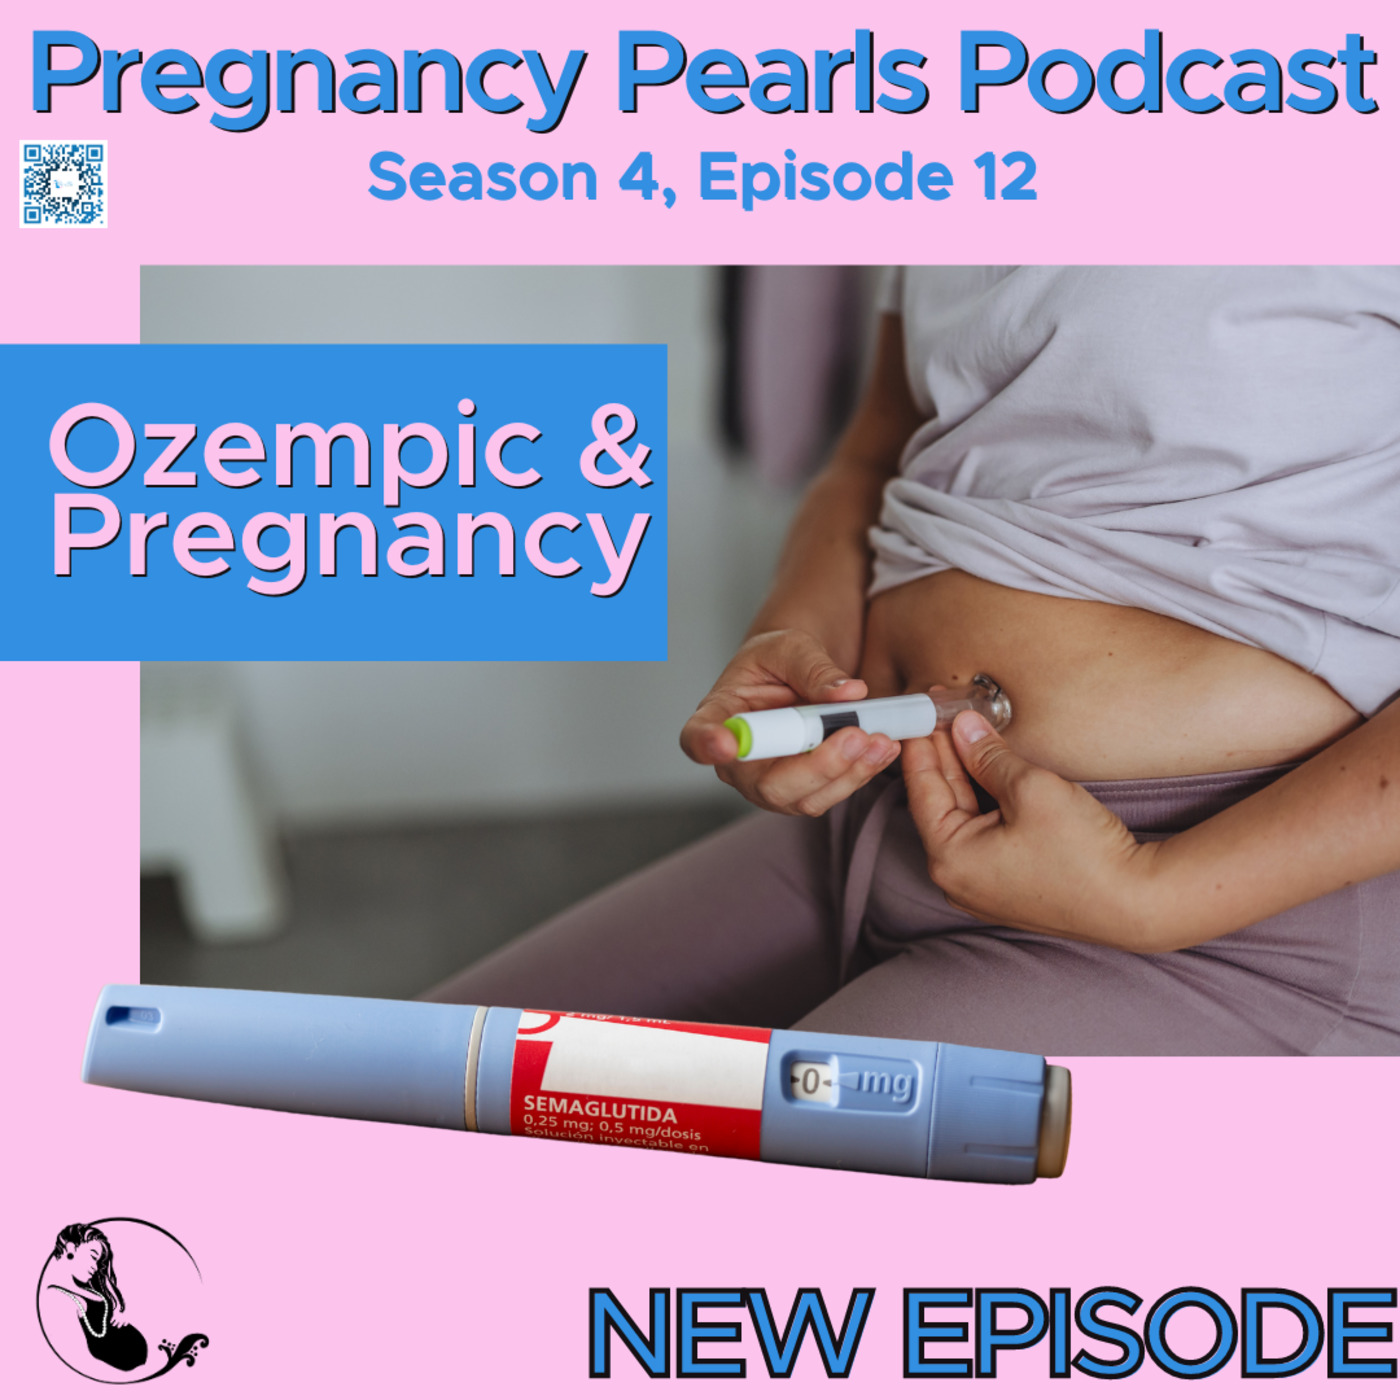 Ozempic and Pregnancy